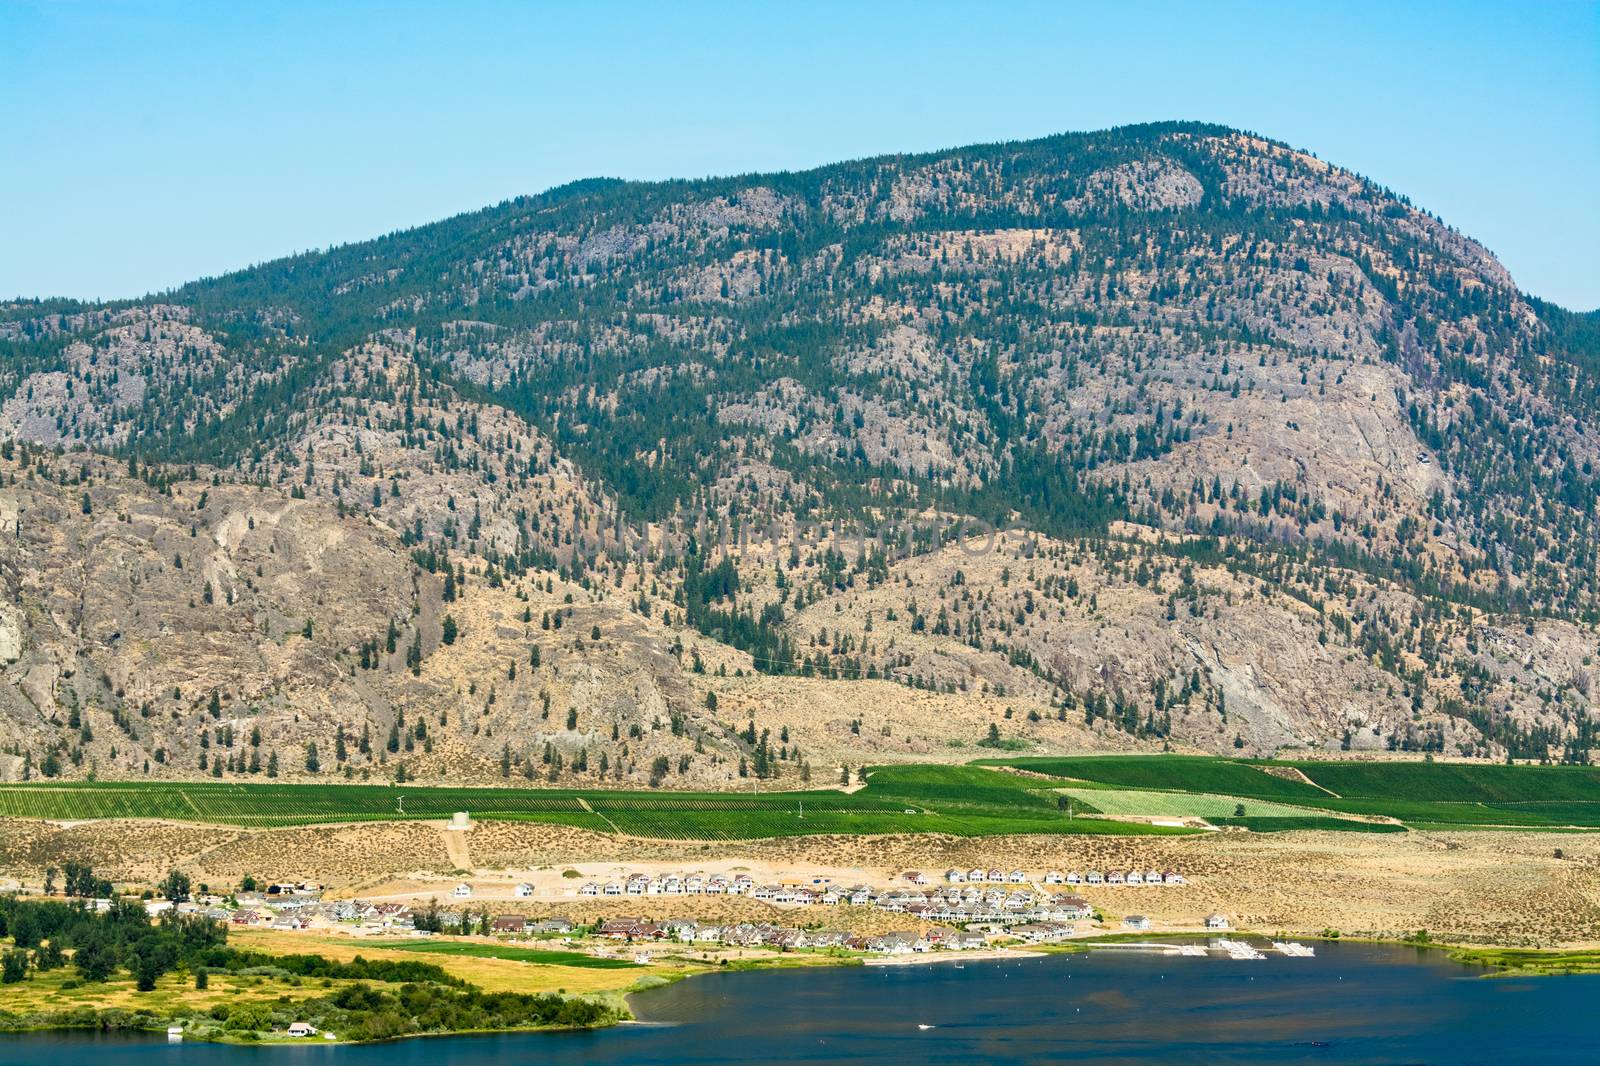 Okanagan valley view with residential area and orchard farm fields. Residential houses in Okanagan valley built on Osoyoos lake shore with mountains on the back side